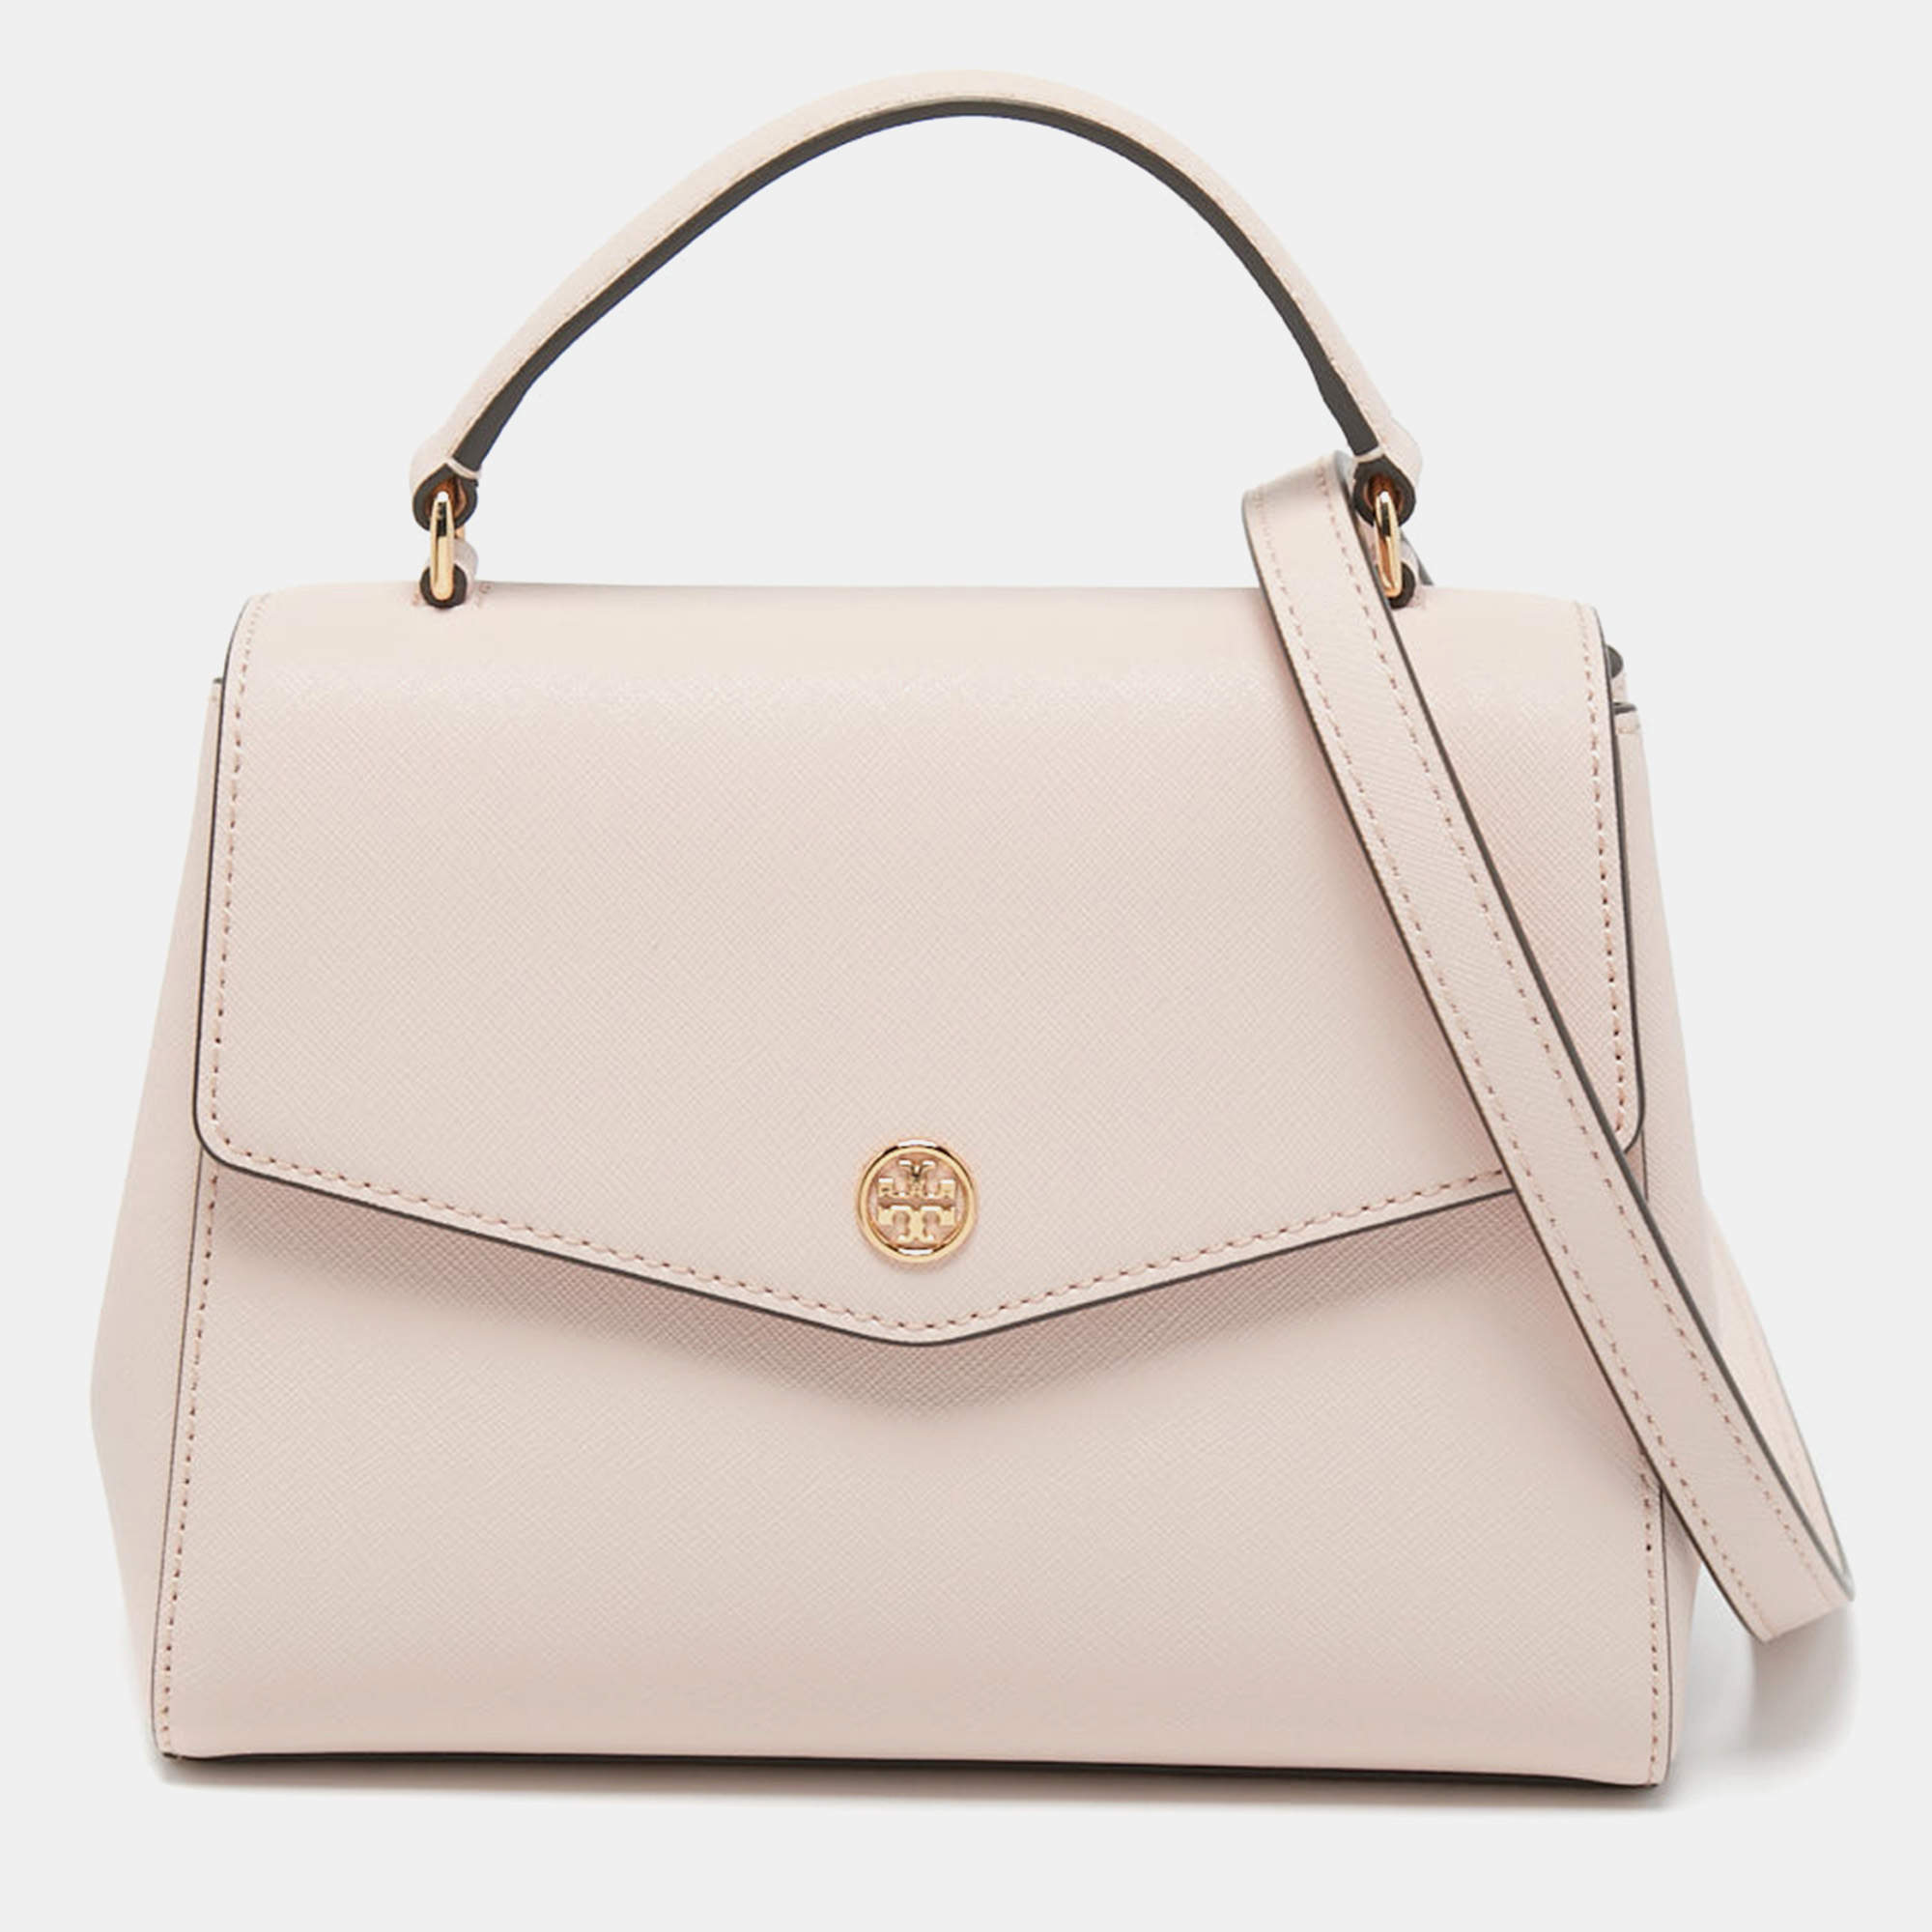 Tory Burch Pink Saffiano Leather Small Robinson Top Handle Bag